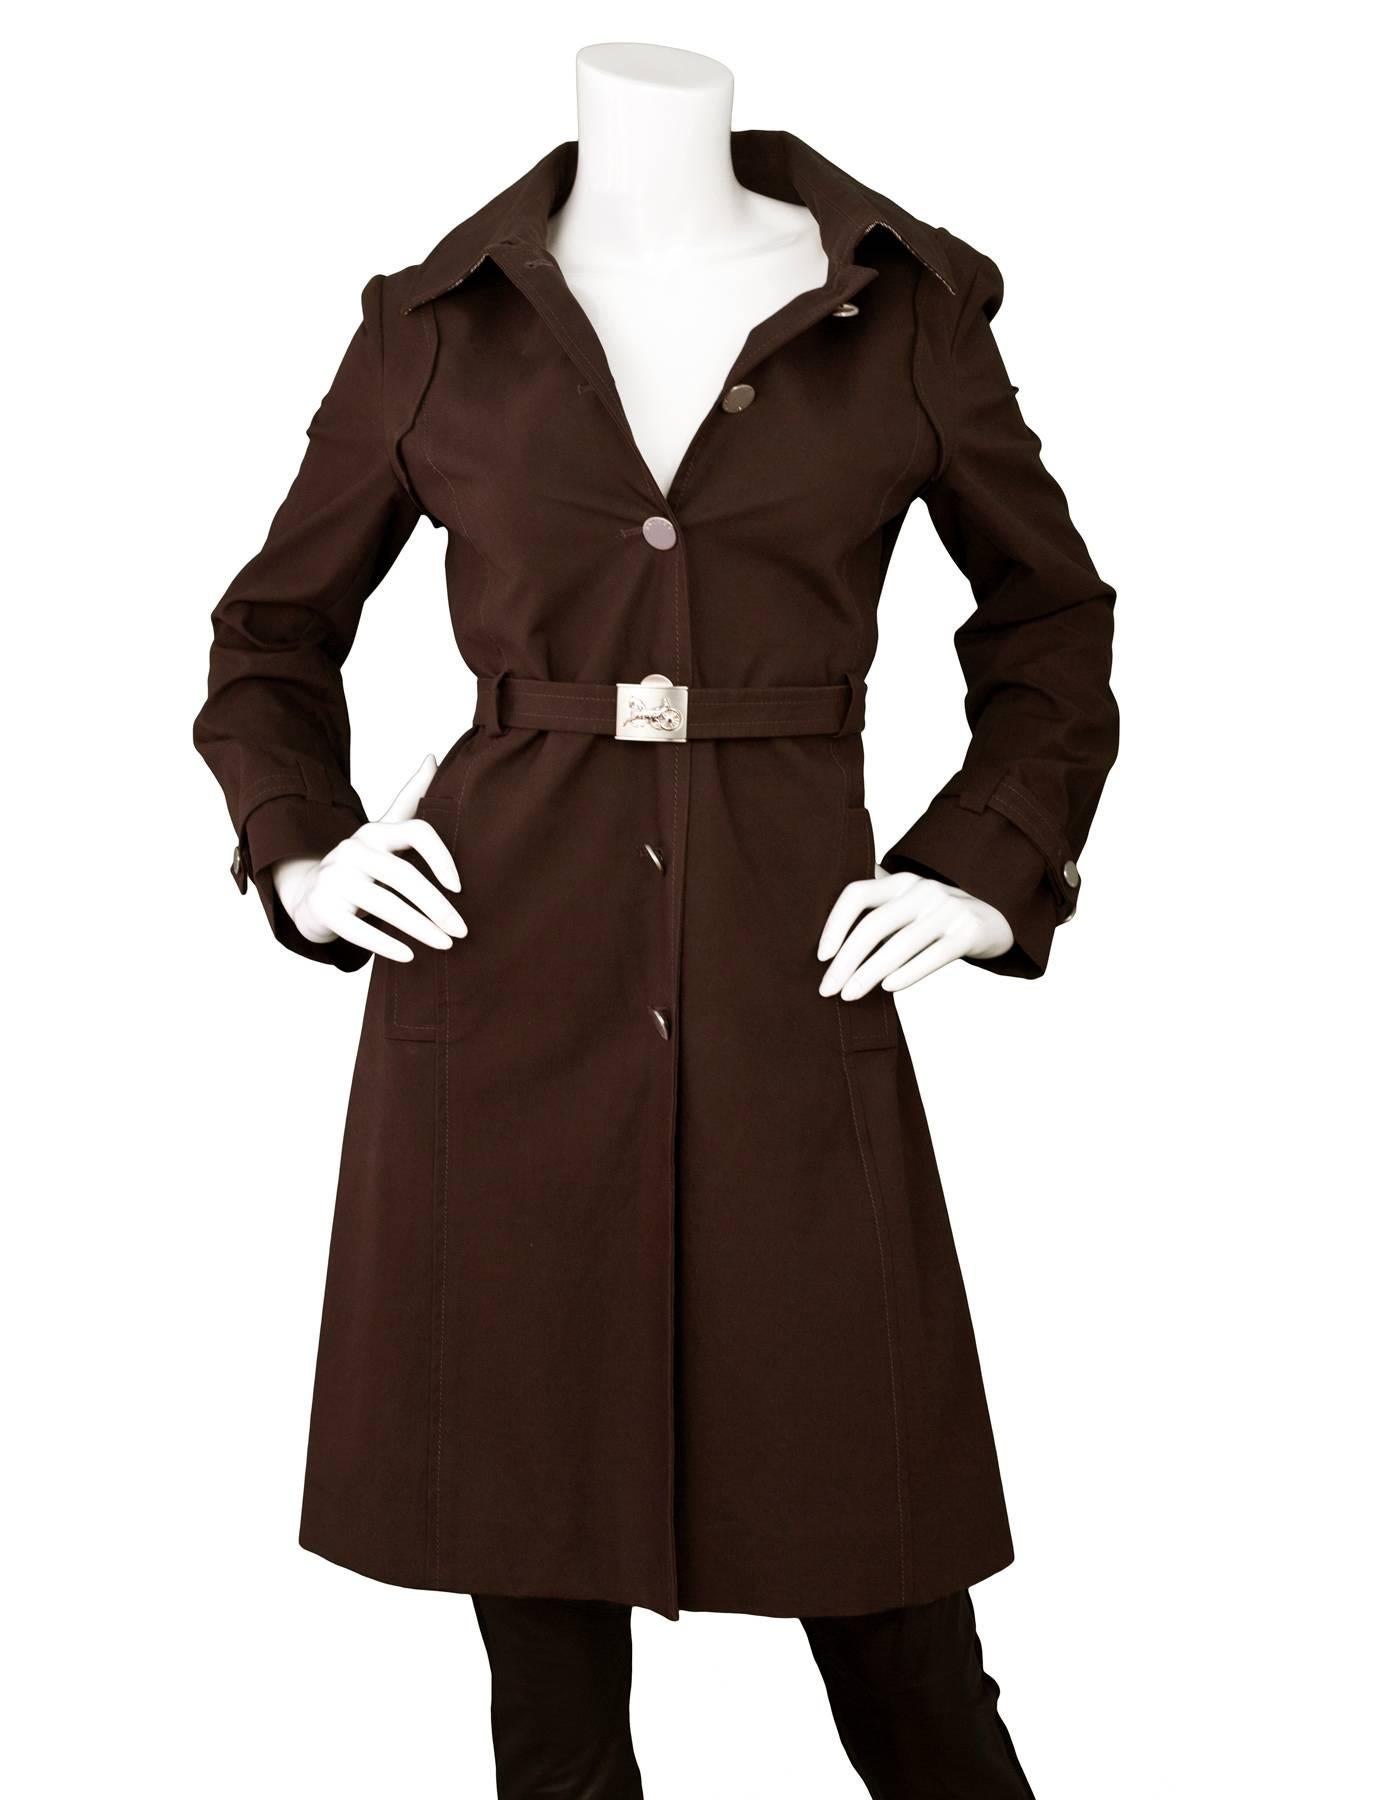 Celine Brown Trench Coat Sz IT40

Made In: Slovania
Color: Brown
Composition: 88% cotton, 12% polyurethane
Lining: Brown textile
Closure/Opening: Front button closure
Exterior Pockets: Side hip pockets
Overall Condition: Excellent pre-owned